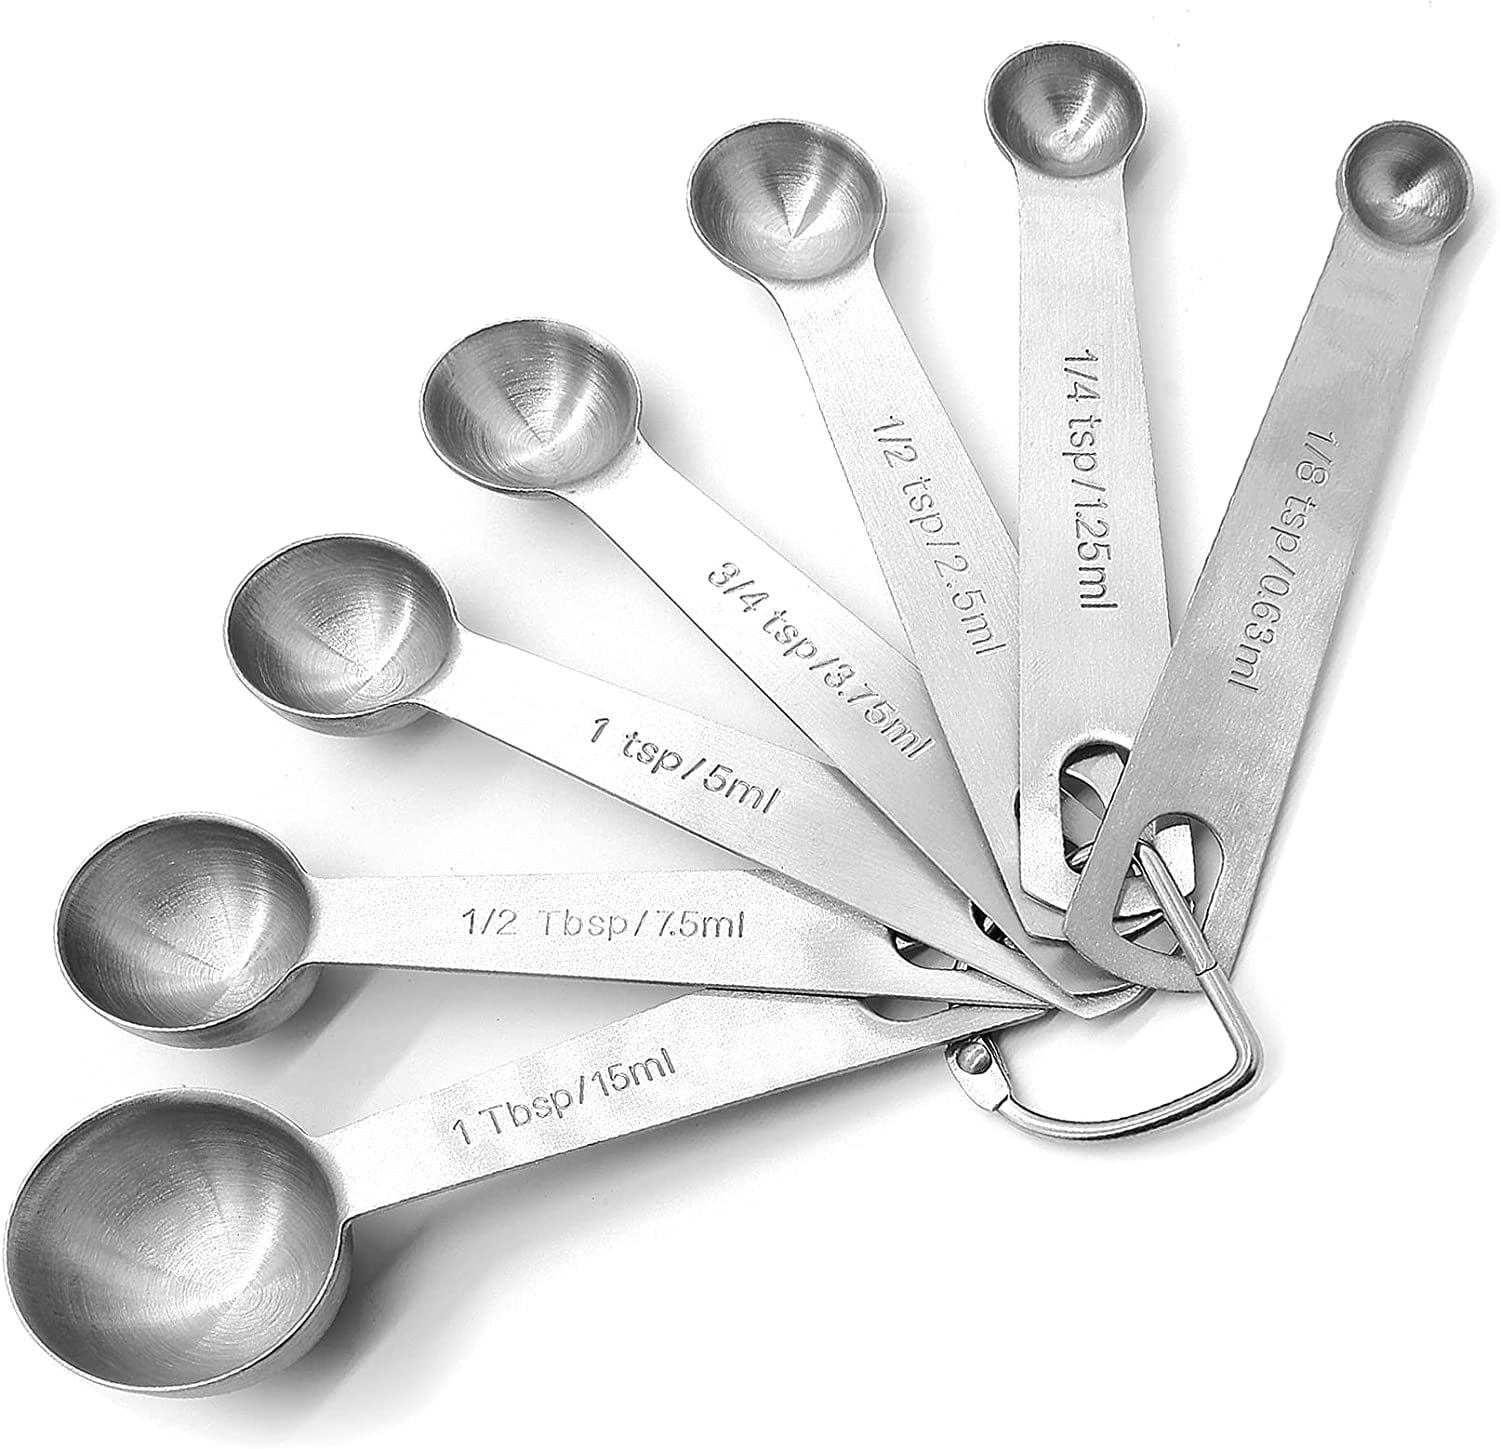 4PCS OstWony Measuring Spoons Set, Includes 1/4 tsp, 1/2 tsp, 1 tsp, 1  tbsp, Food Grade Stainless Steel measuring cups, Tablespoon and Teaspoon  for